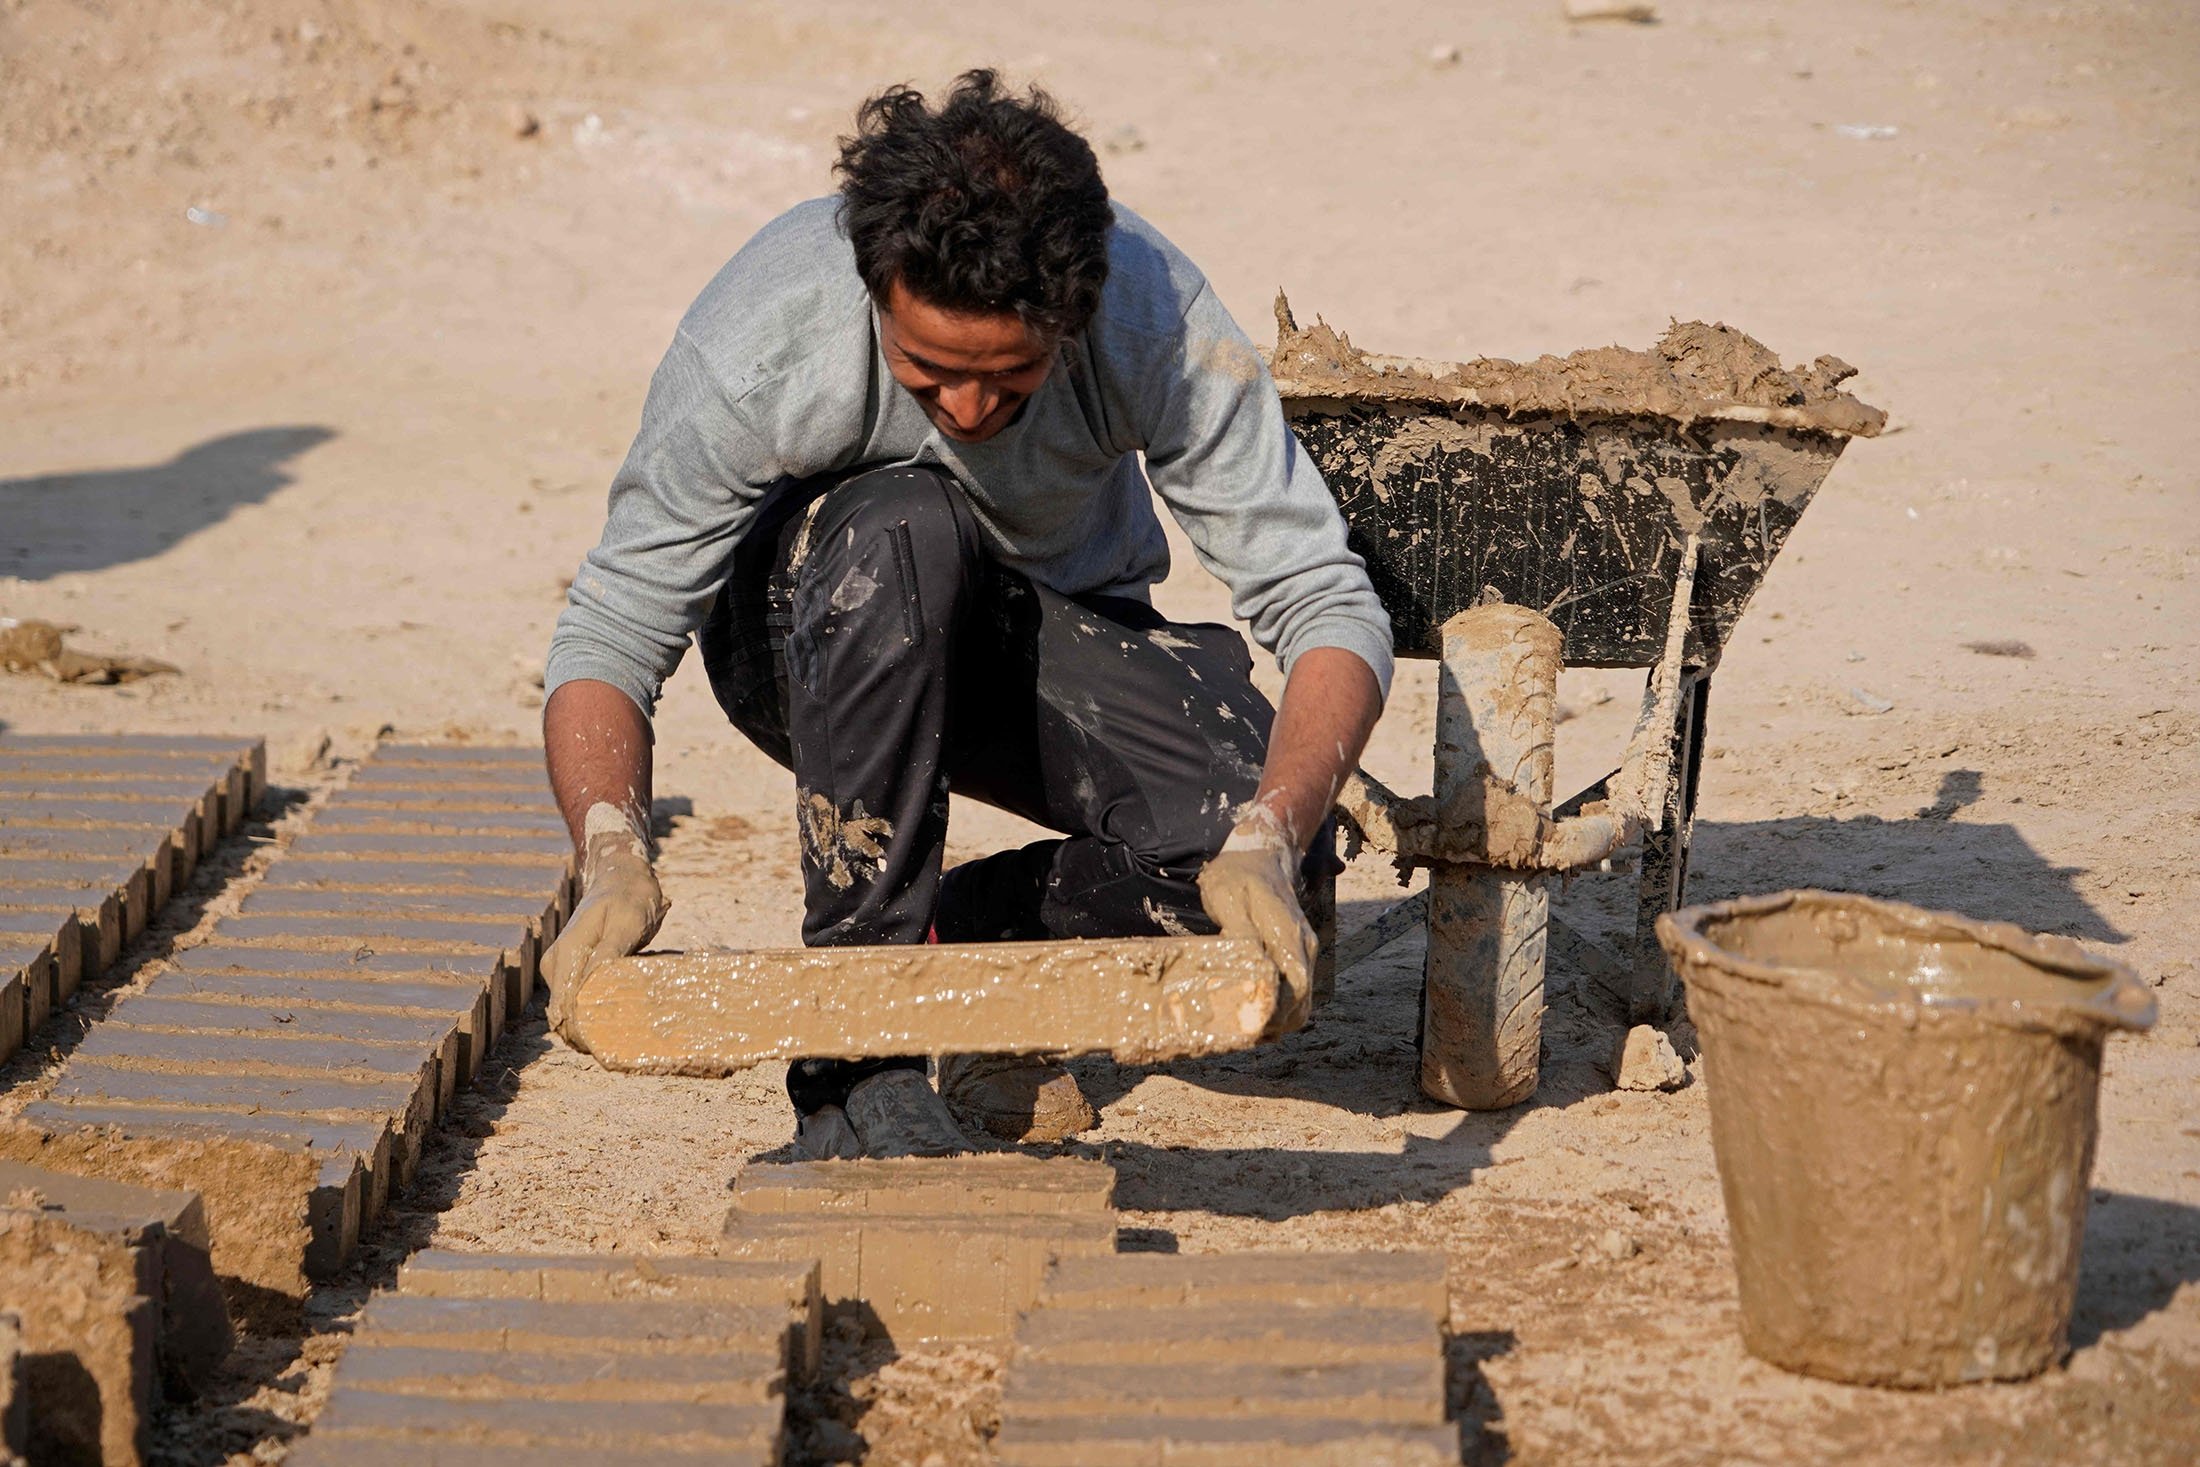 A worker makes traditional clay bricks during a German-Iraqi archaeological expedition to restore the white temple of Anu in the Warka (ancient Uruk) site in Muthanna province, Iraq, Nov. 27, 2021. (AFP Photo)